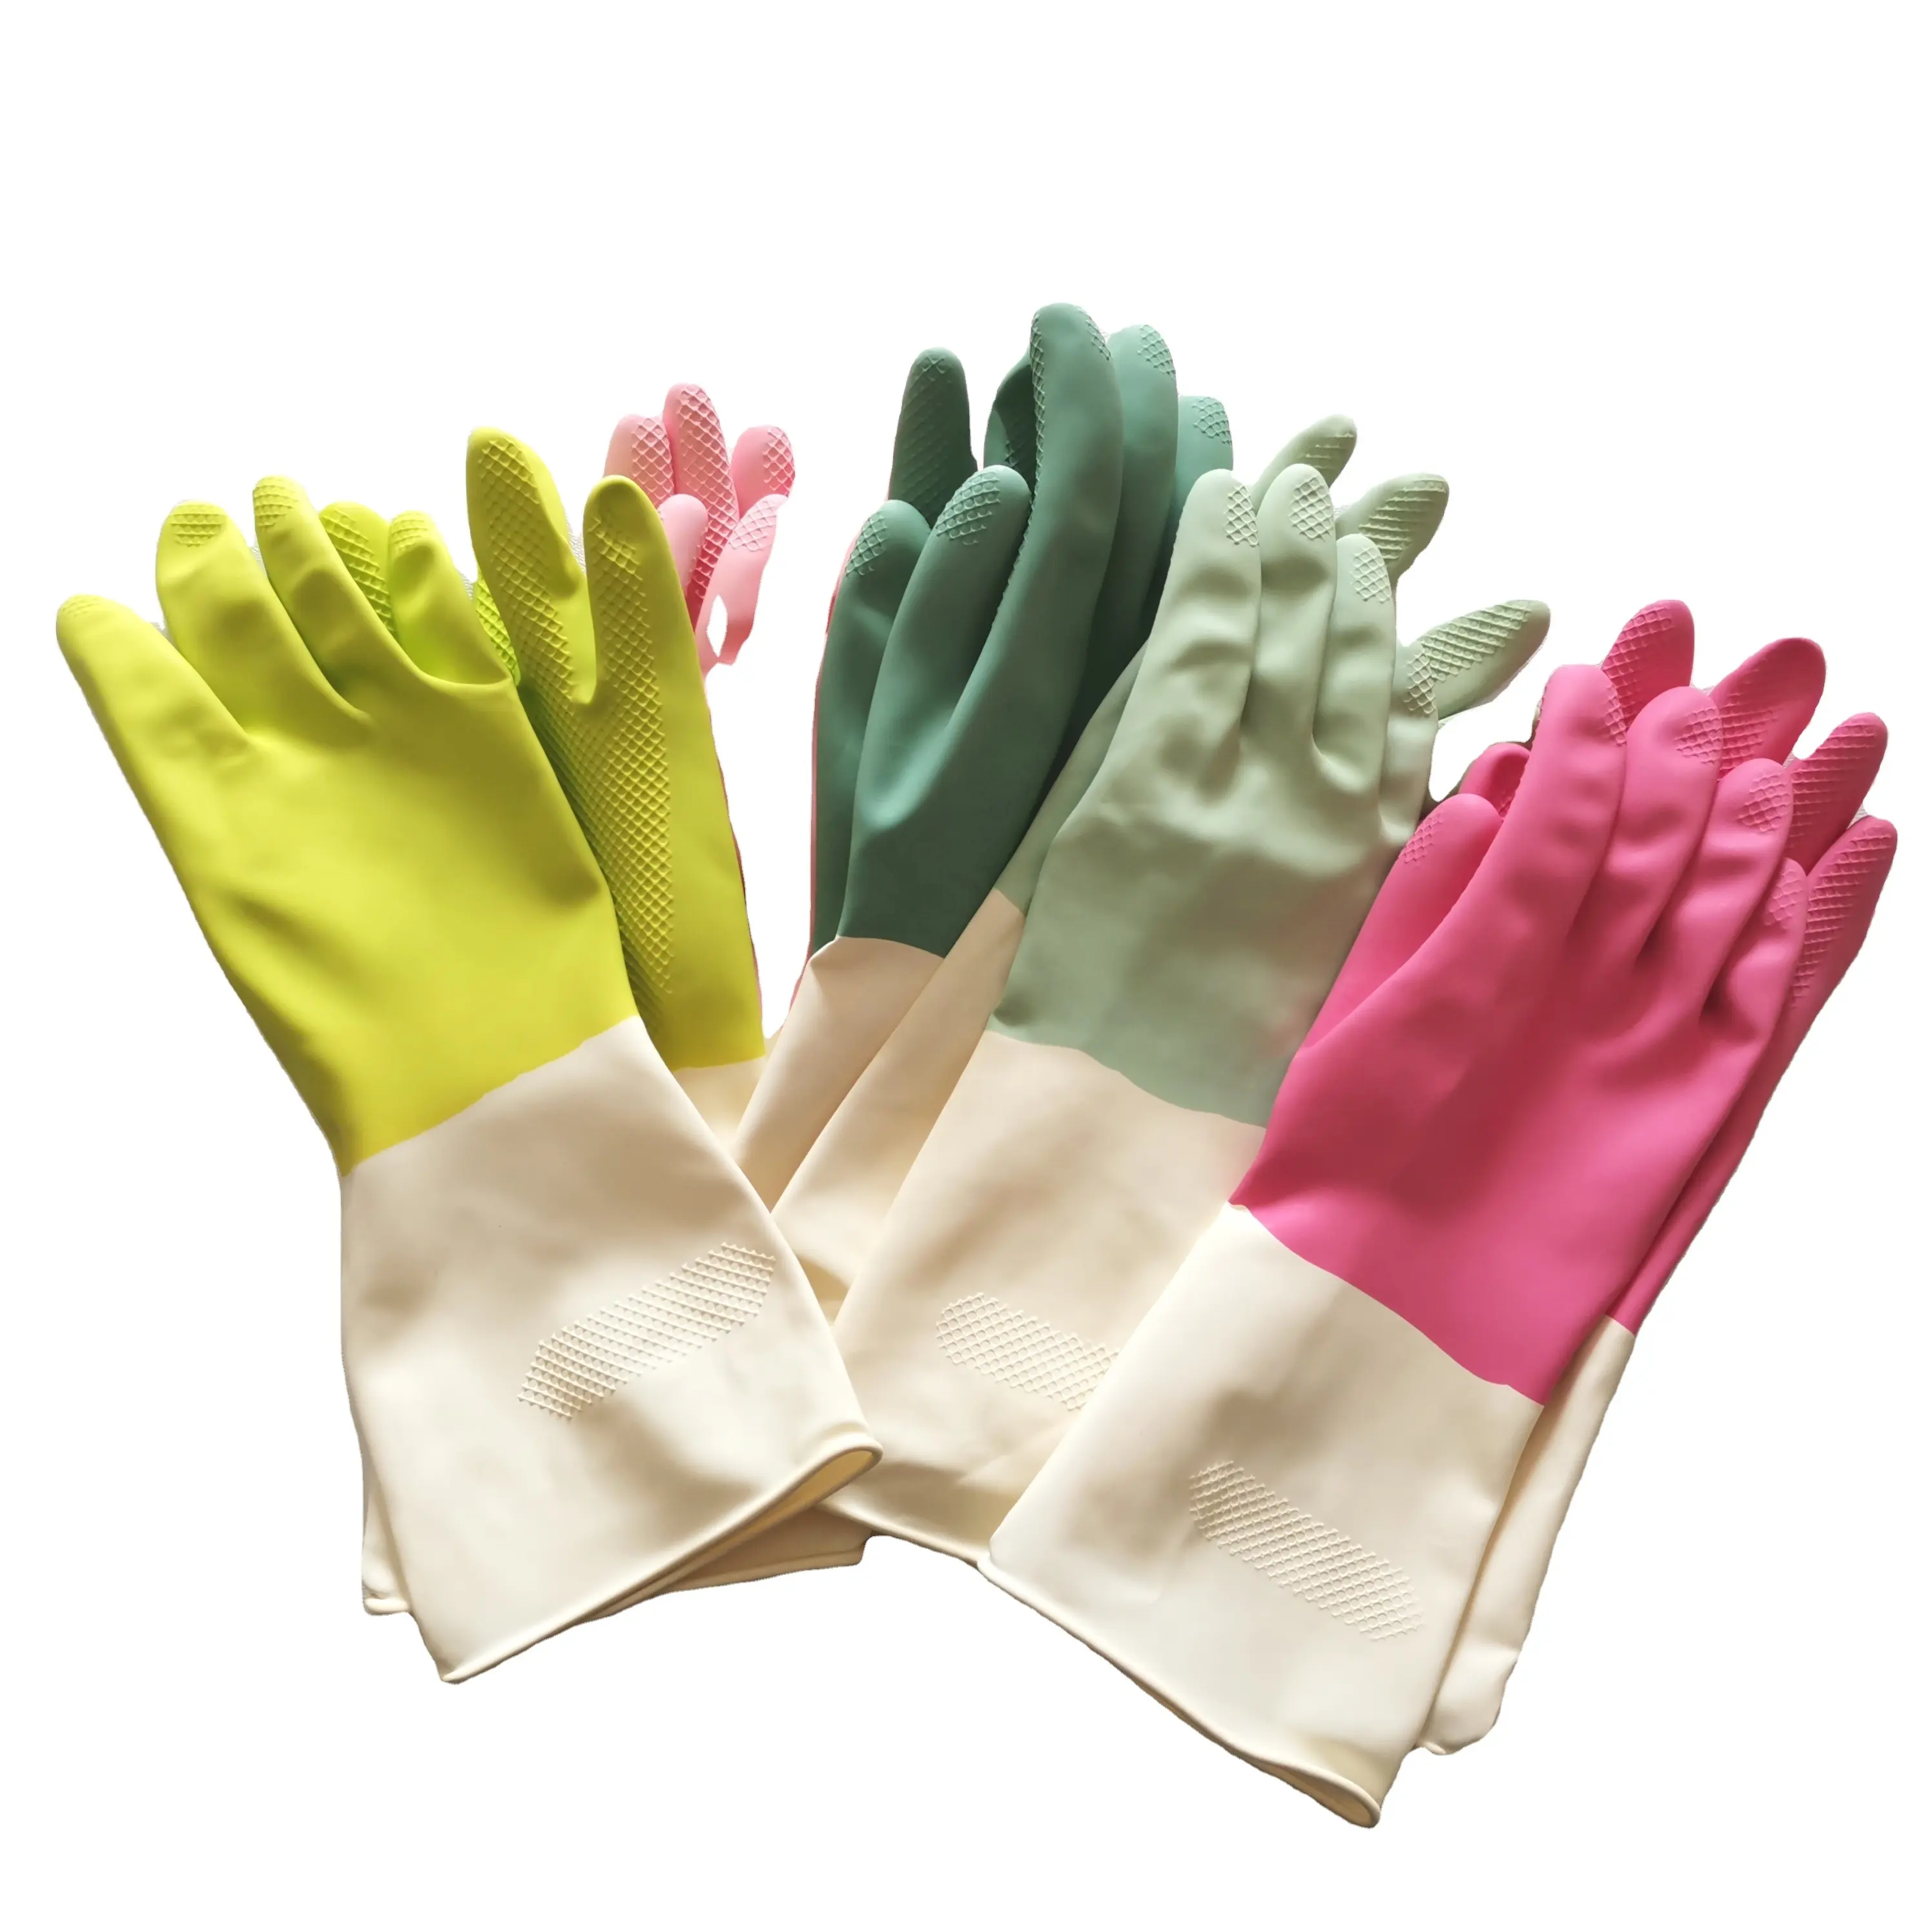 Xingli Bi colors daily life Korean style Latex gloves rubber thickened quality glove household rubber work glove